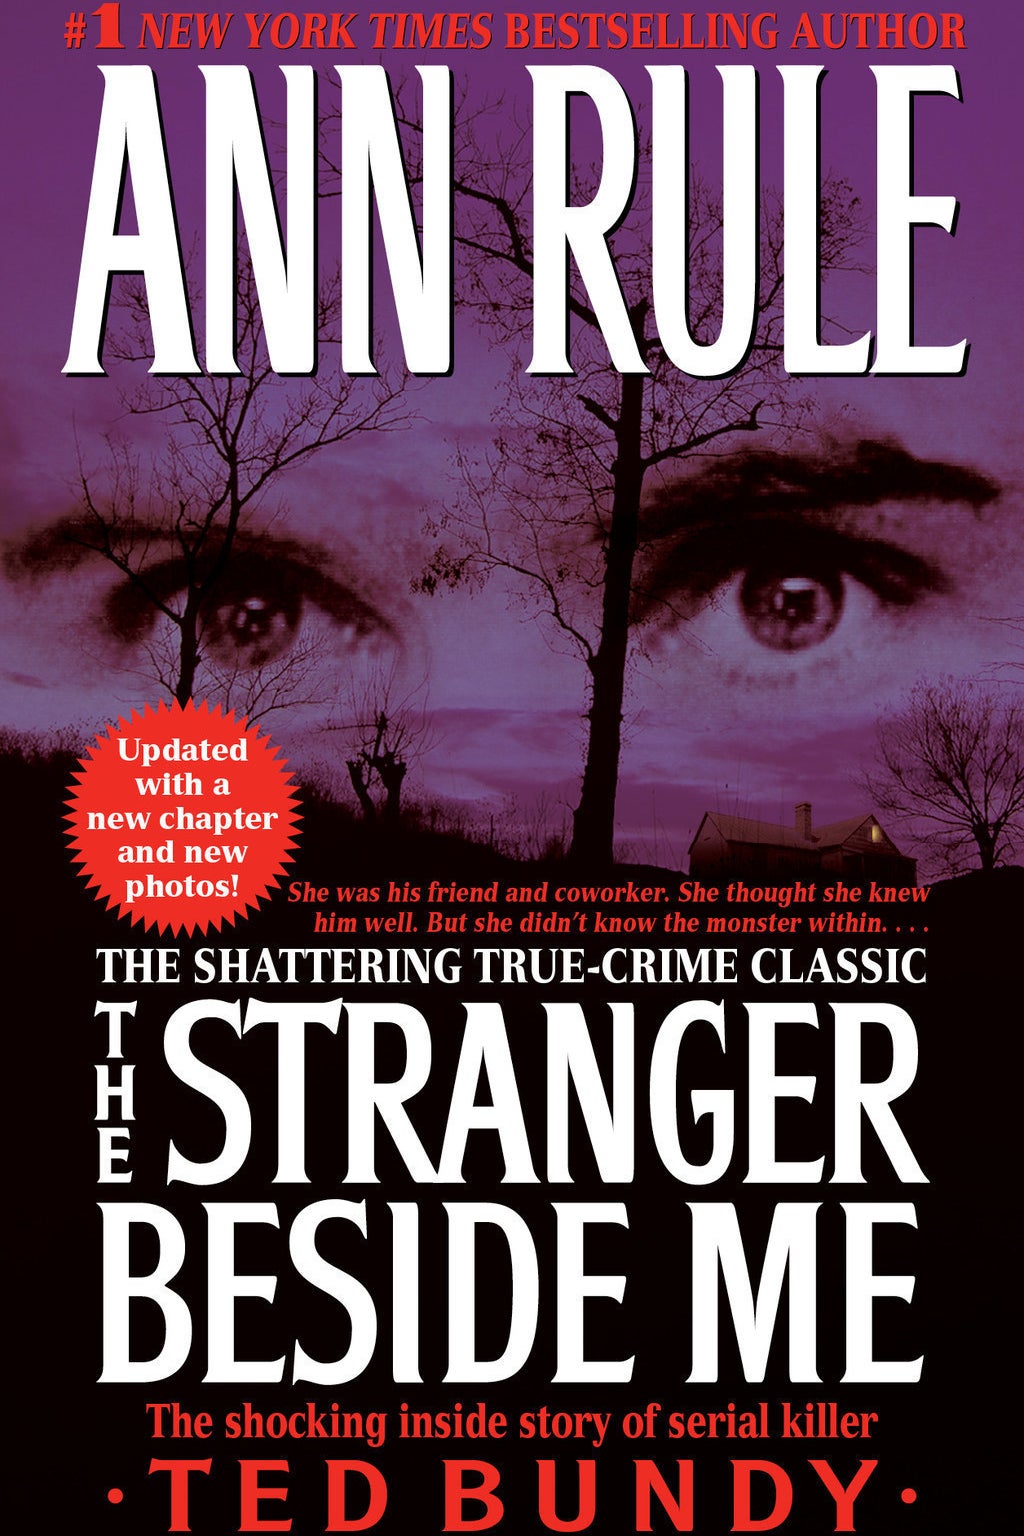 18 Creepily Fascinating True Crime Books You Really Need To Read